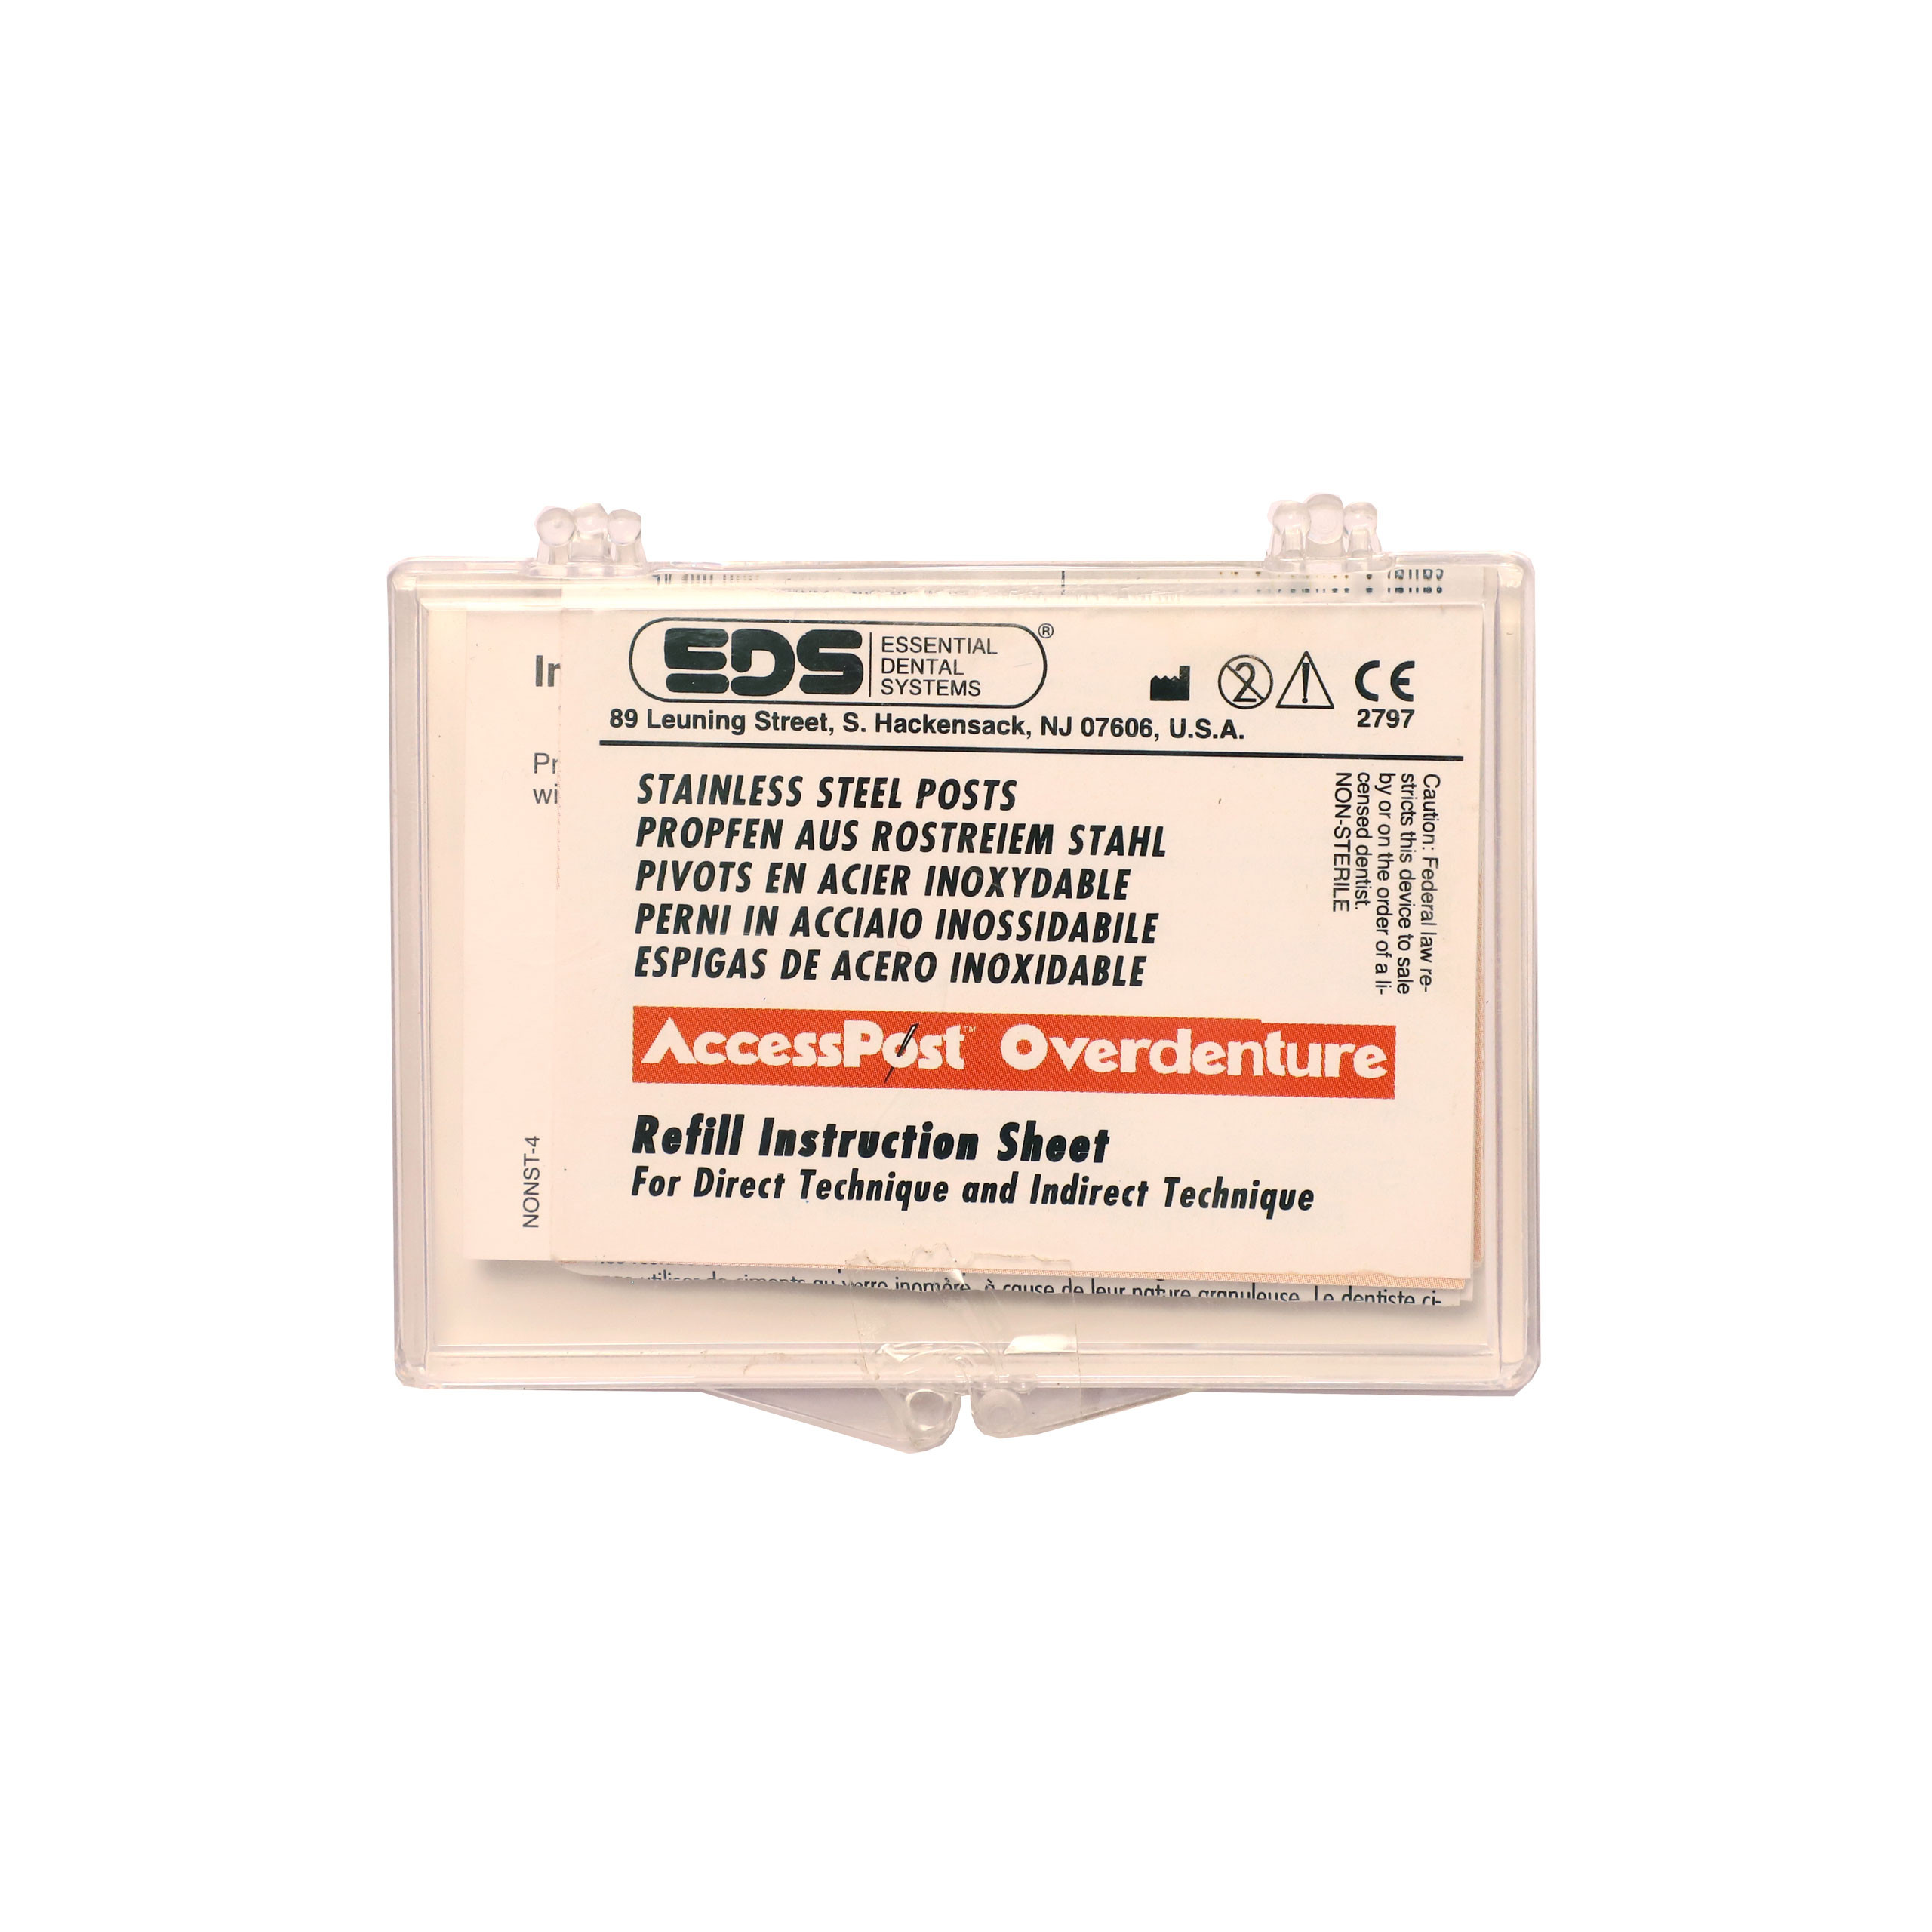 EDS Access Post Overdenture Trial Kit